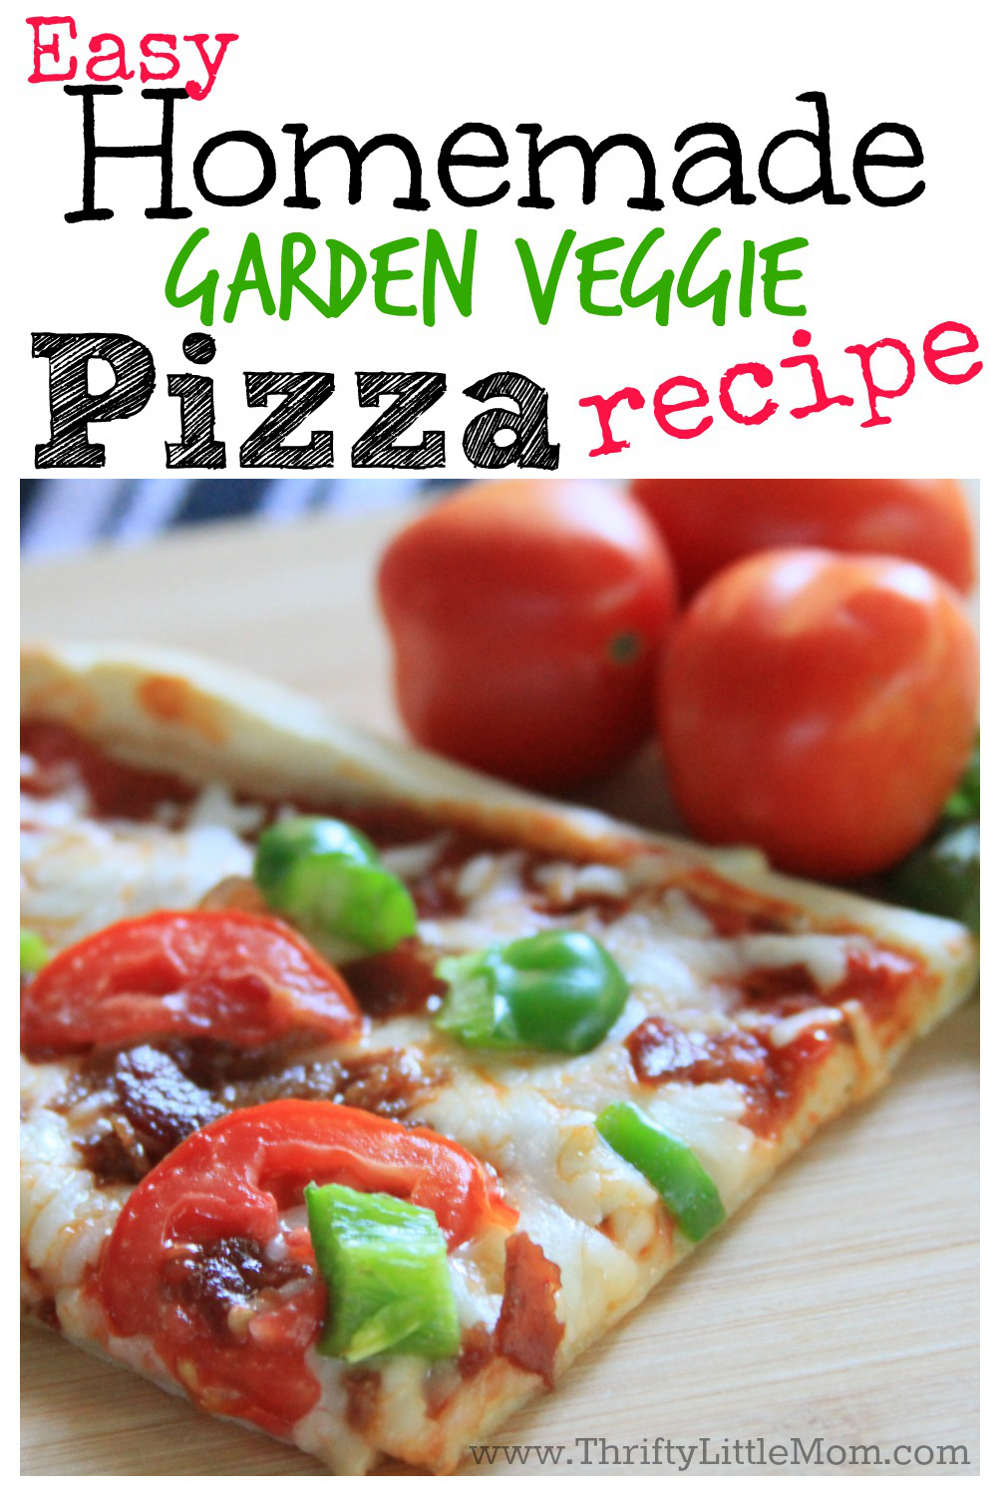 Easy Homemade Garden Veggie Pizza Recipe. This is a really quick and delicious pizza recipe to keep around for the nights when you need a really quick, crowd pleasing dinner when you are short on time and energy.